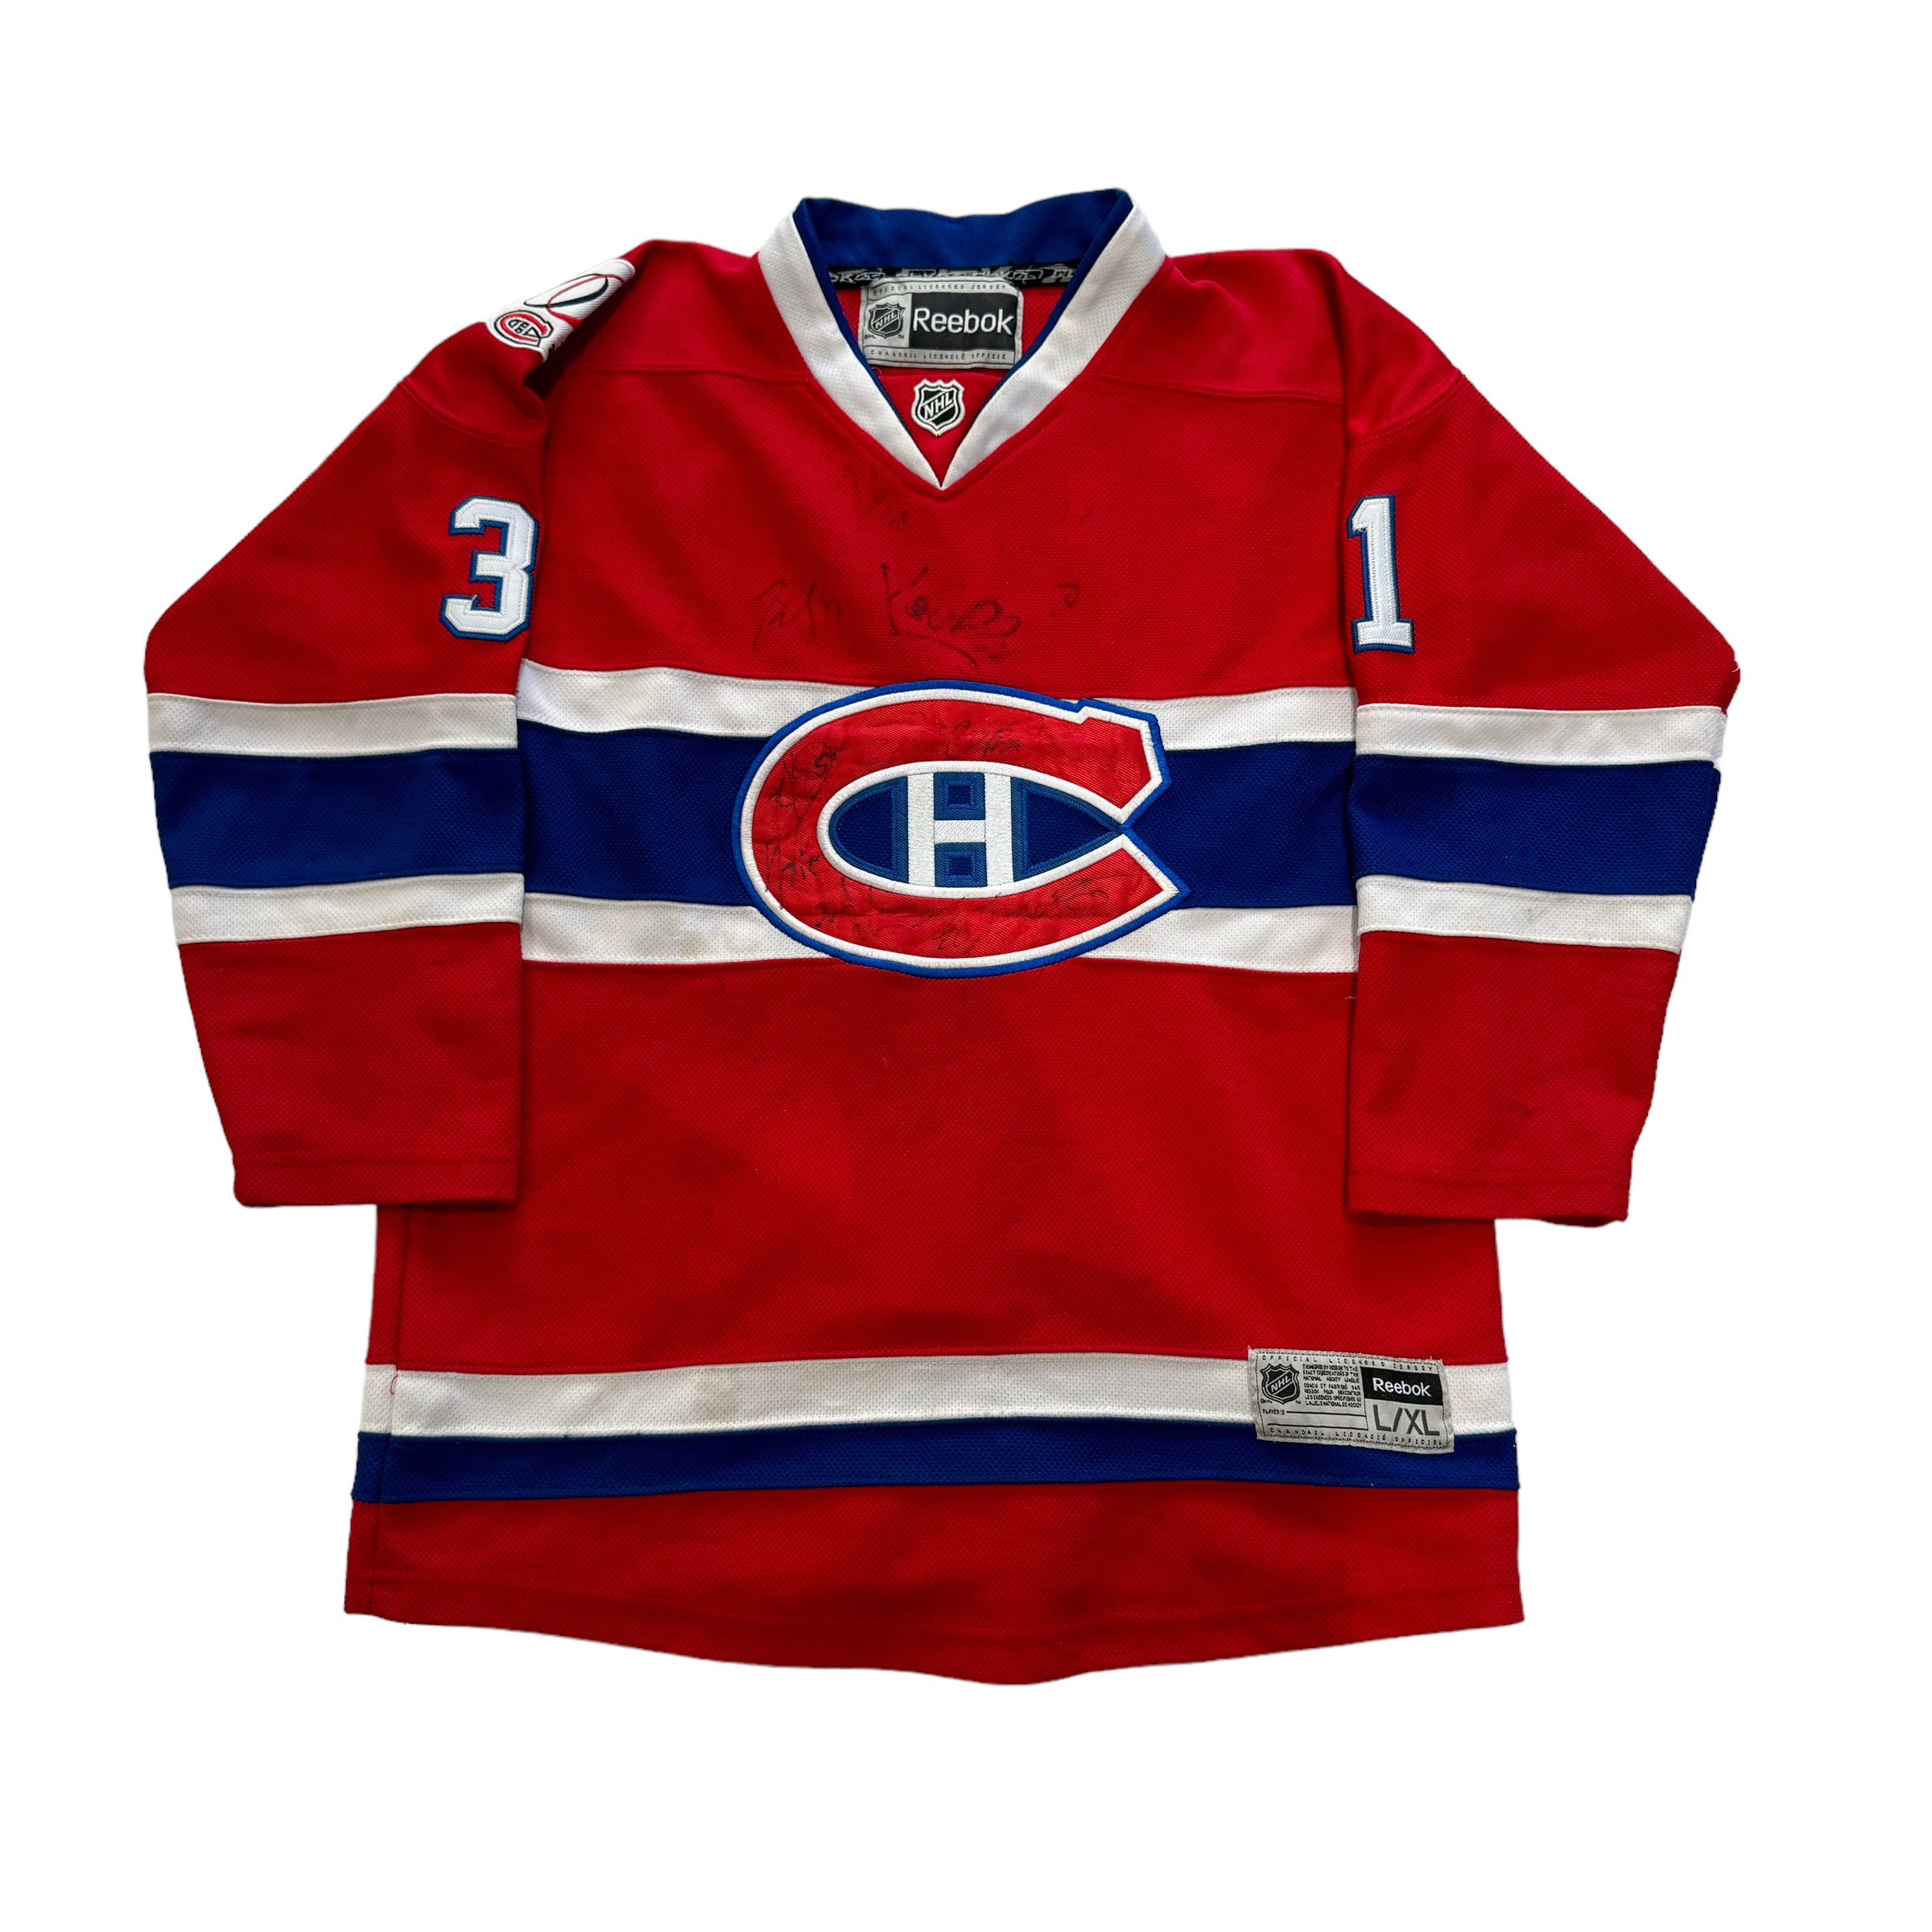 SALE] Personalized Name And Number NHL Montreal Canadiens Reverse Retro  Alternate Jersey Hoodie Sweatshirt 3D - Macall Cloth Store - Destination  for fashionistas